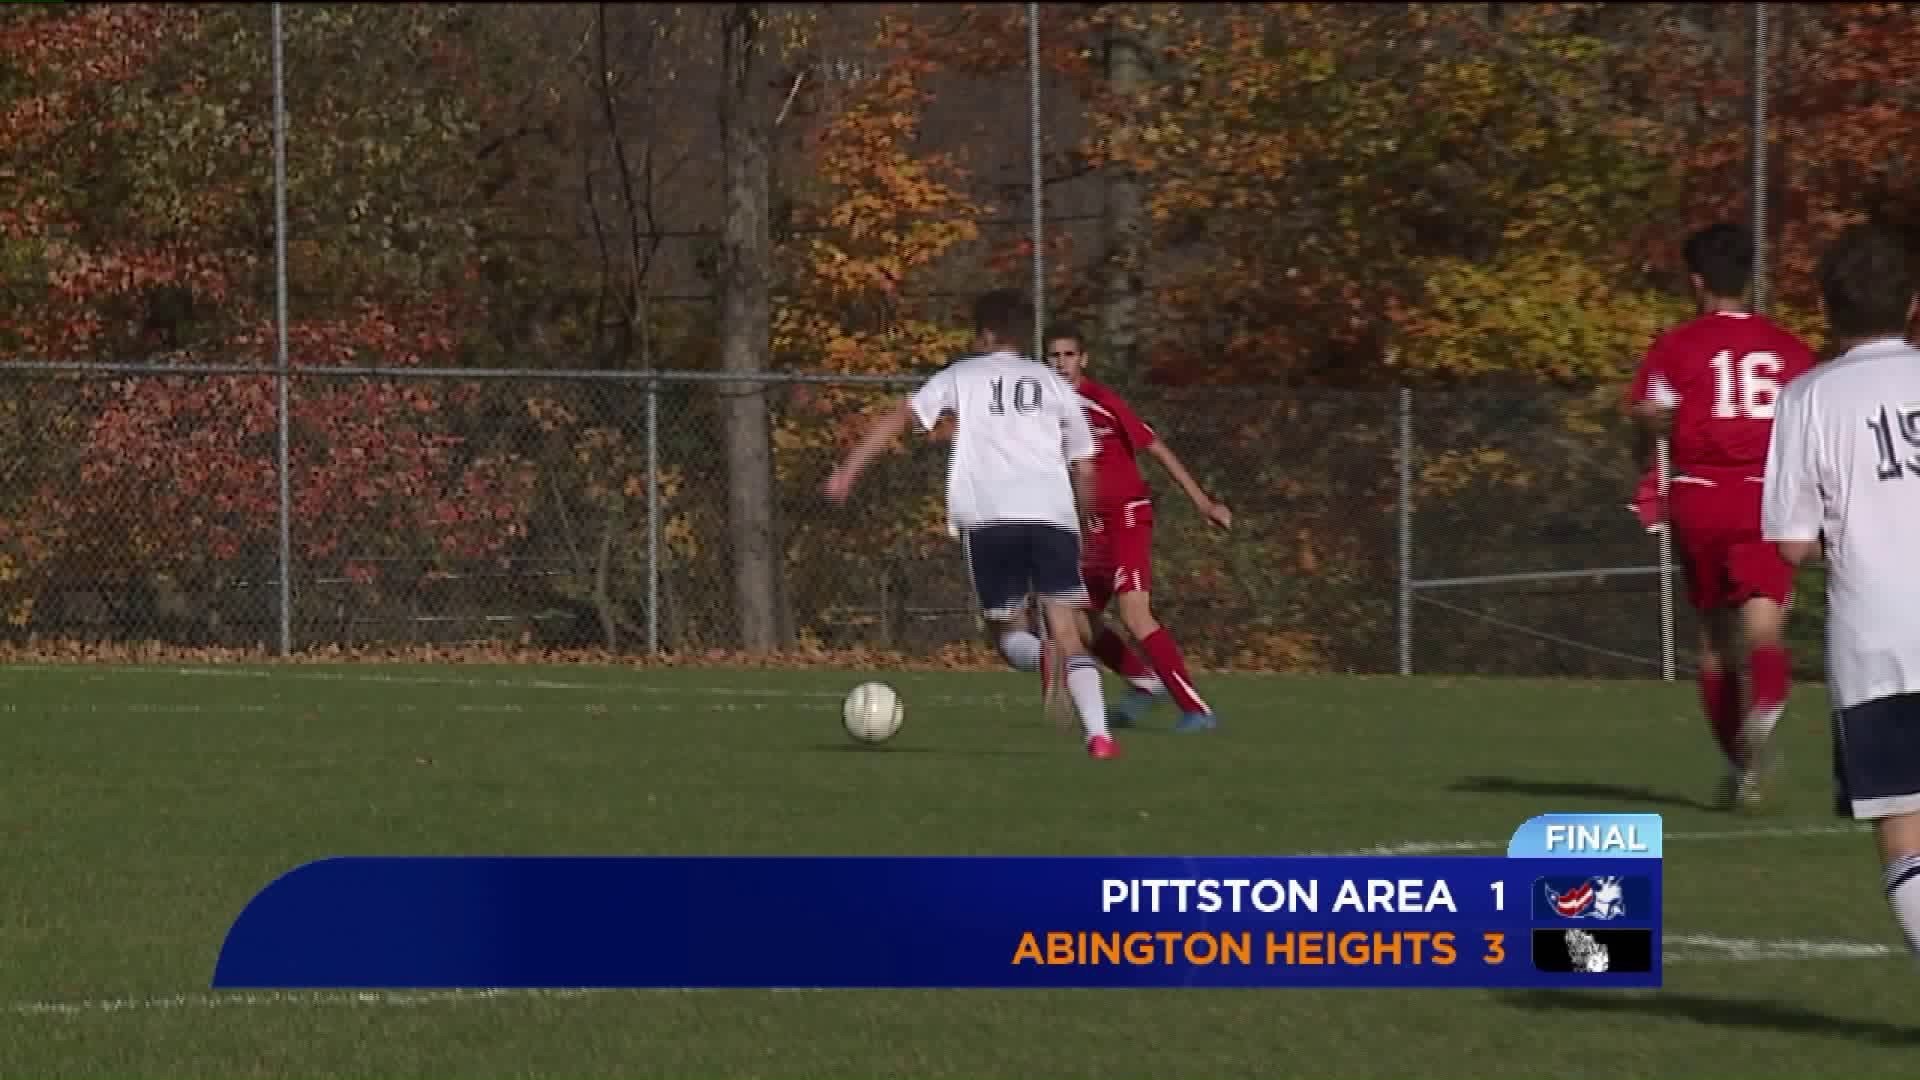 Abington Heights Advance in Boys Soccer Districts